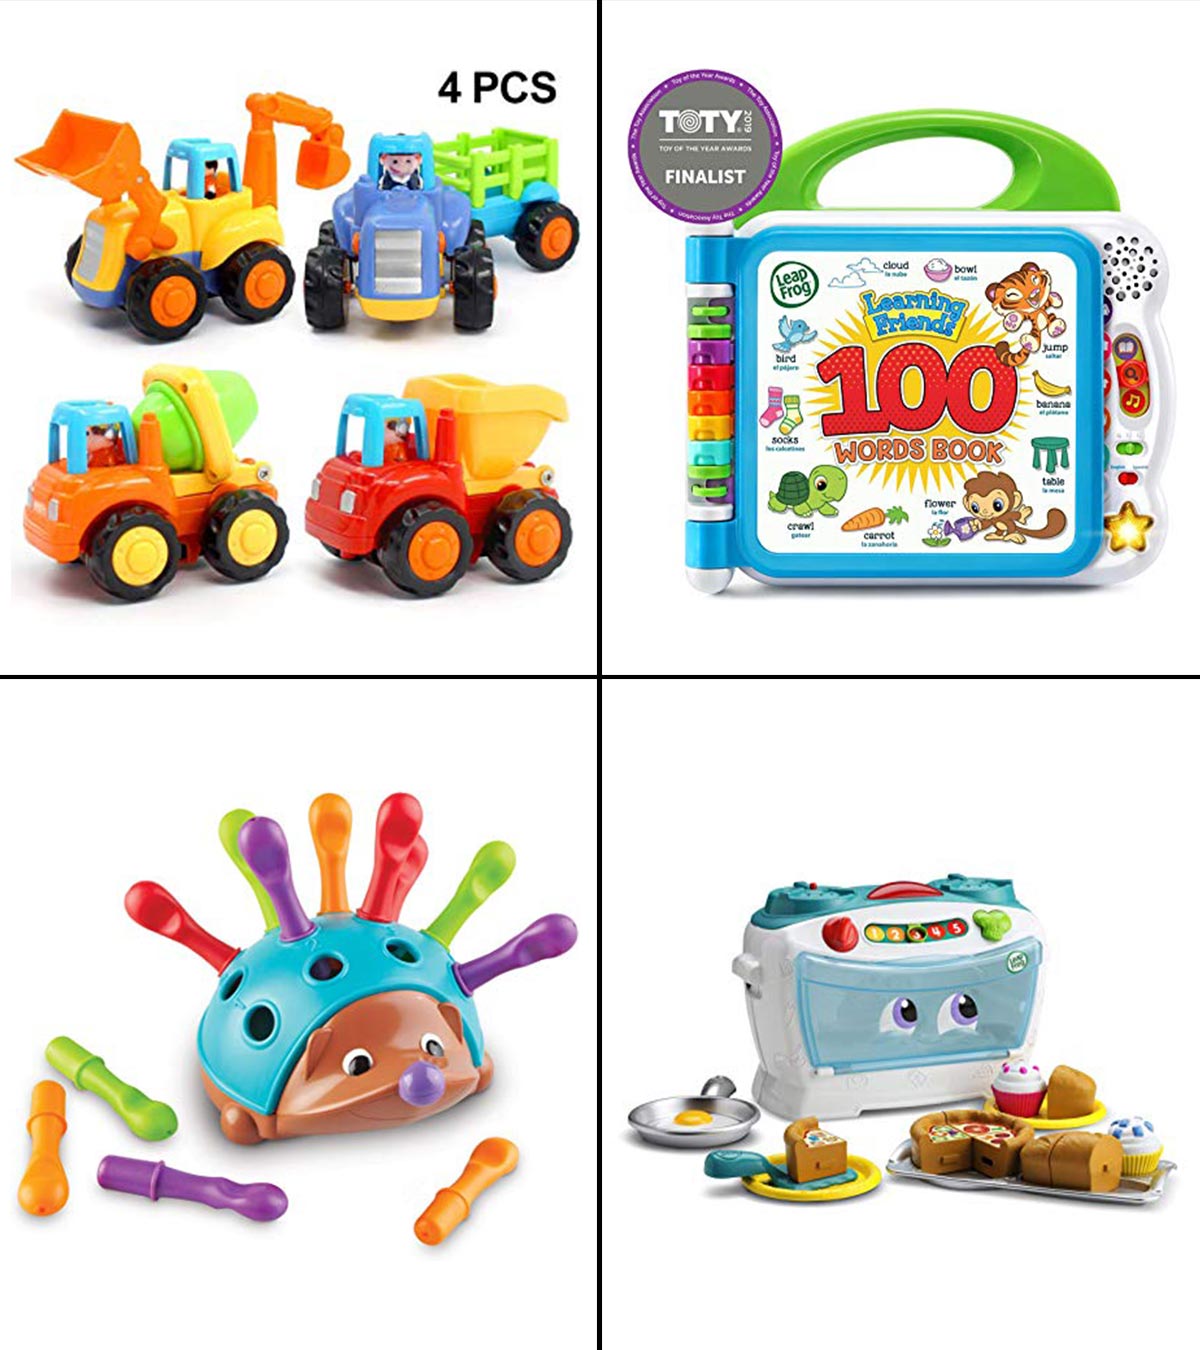 28 of the Best Toys for 3 Year Olds That Are Both Fun and Educational